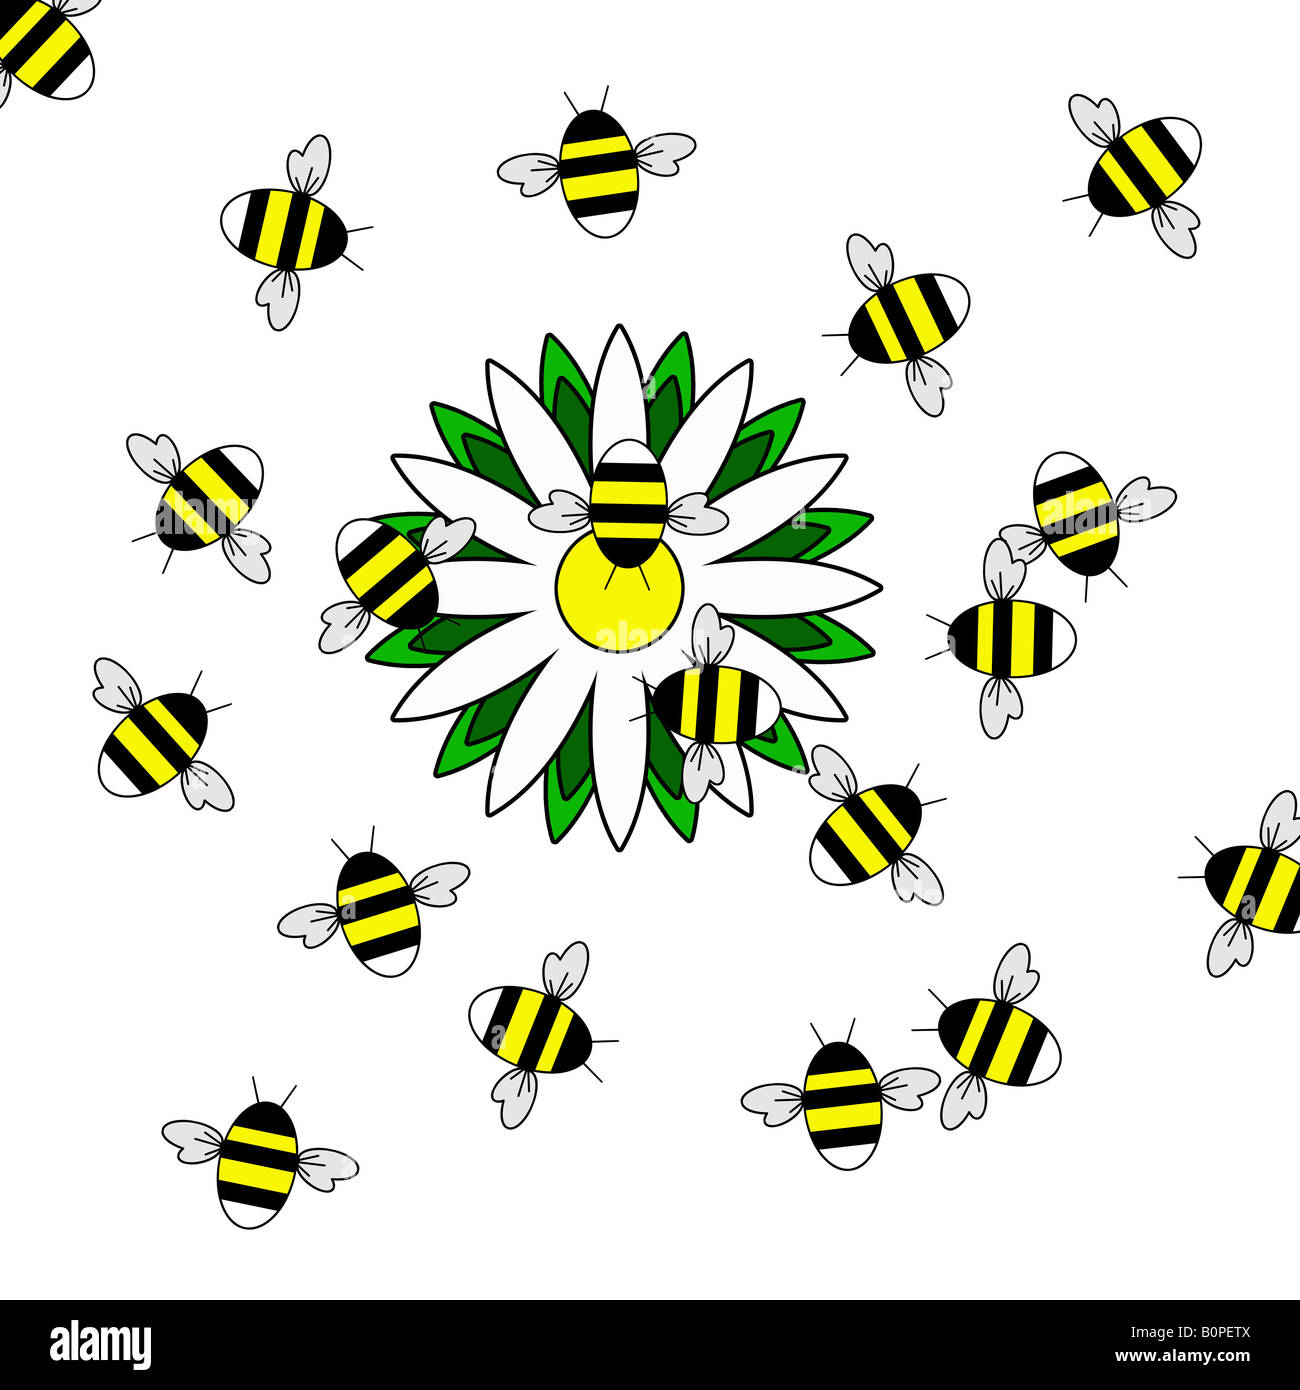 Bees and flower illustration on white background Stock Photo